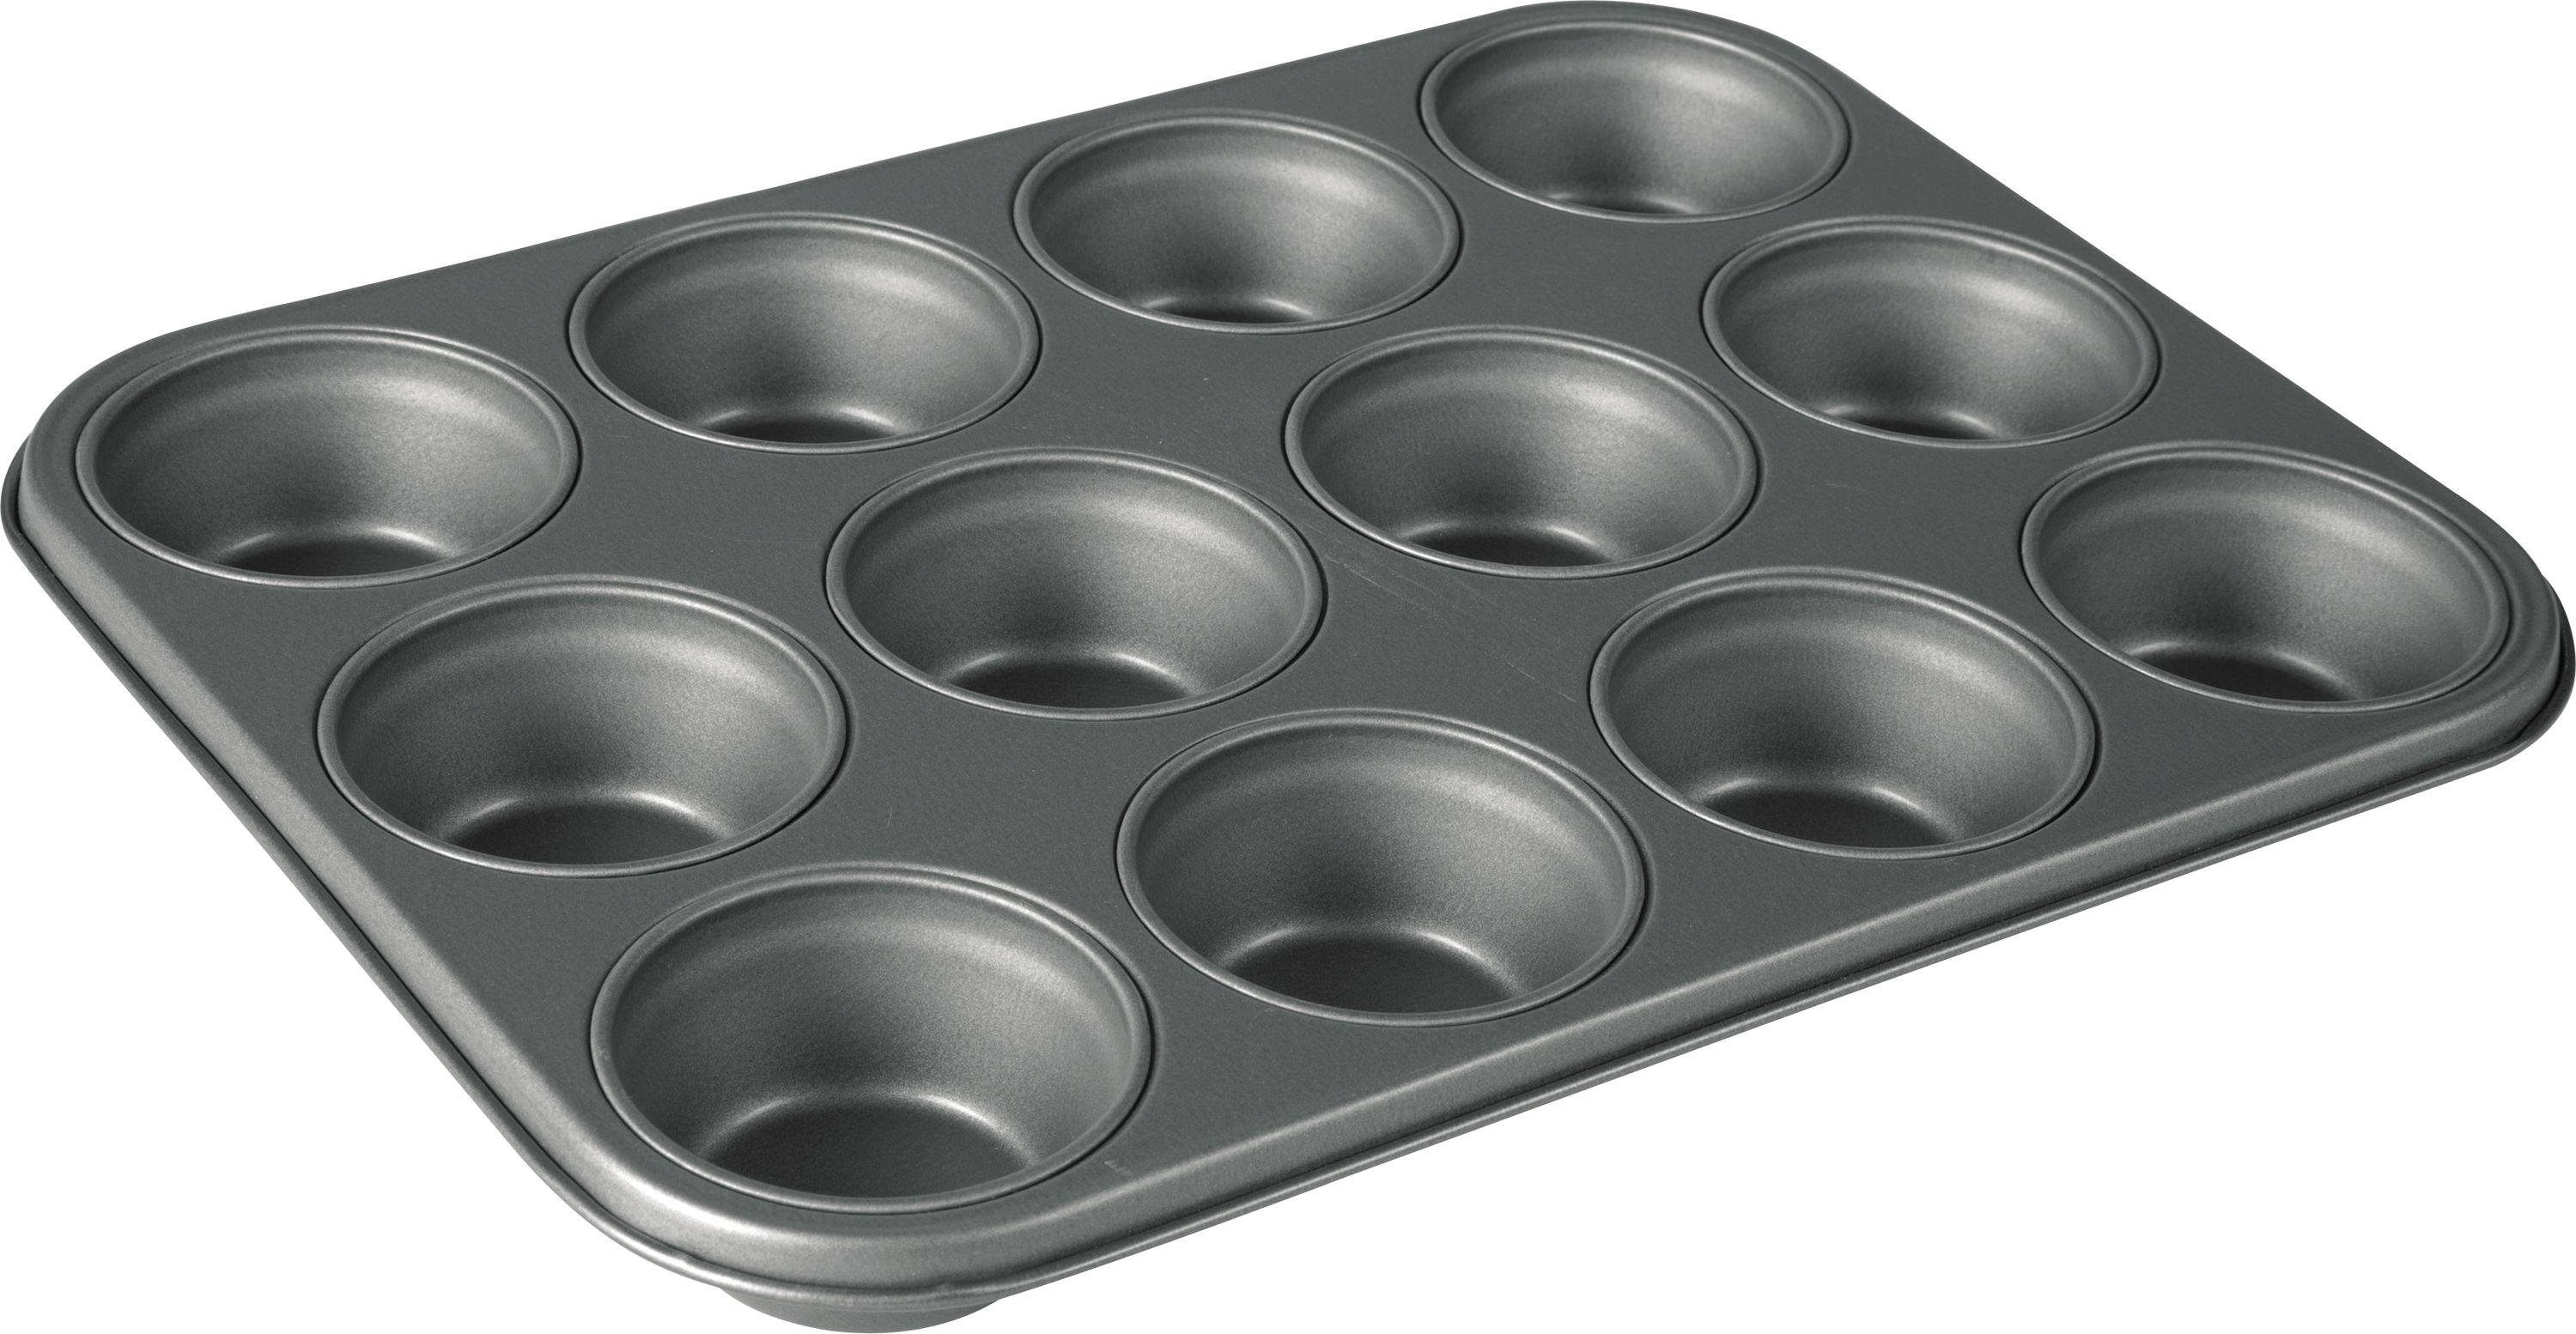 Argos Home Non-Stick 12 Cup Steel Muffin Tray